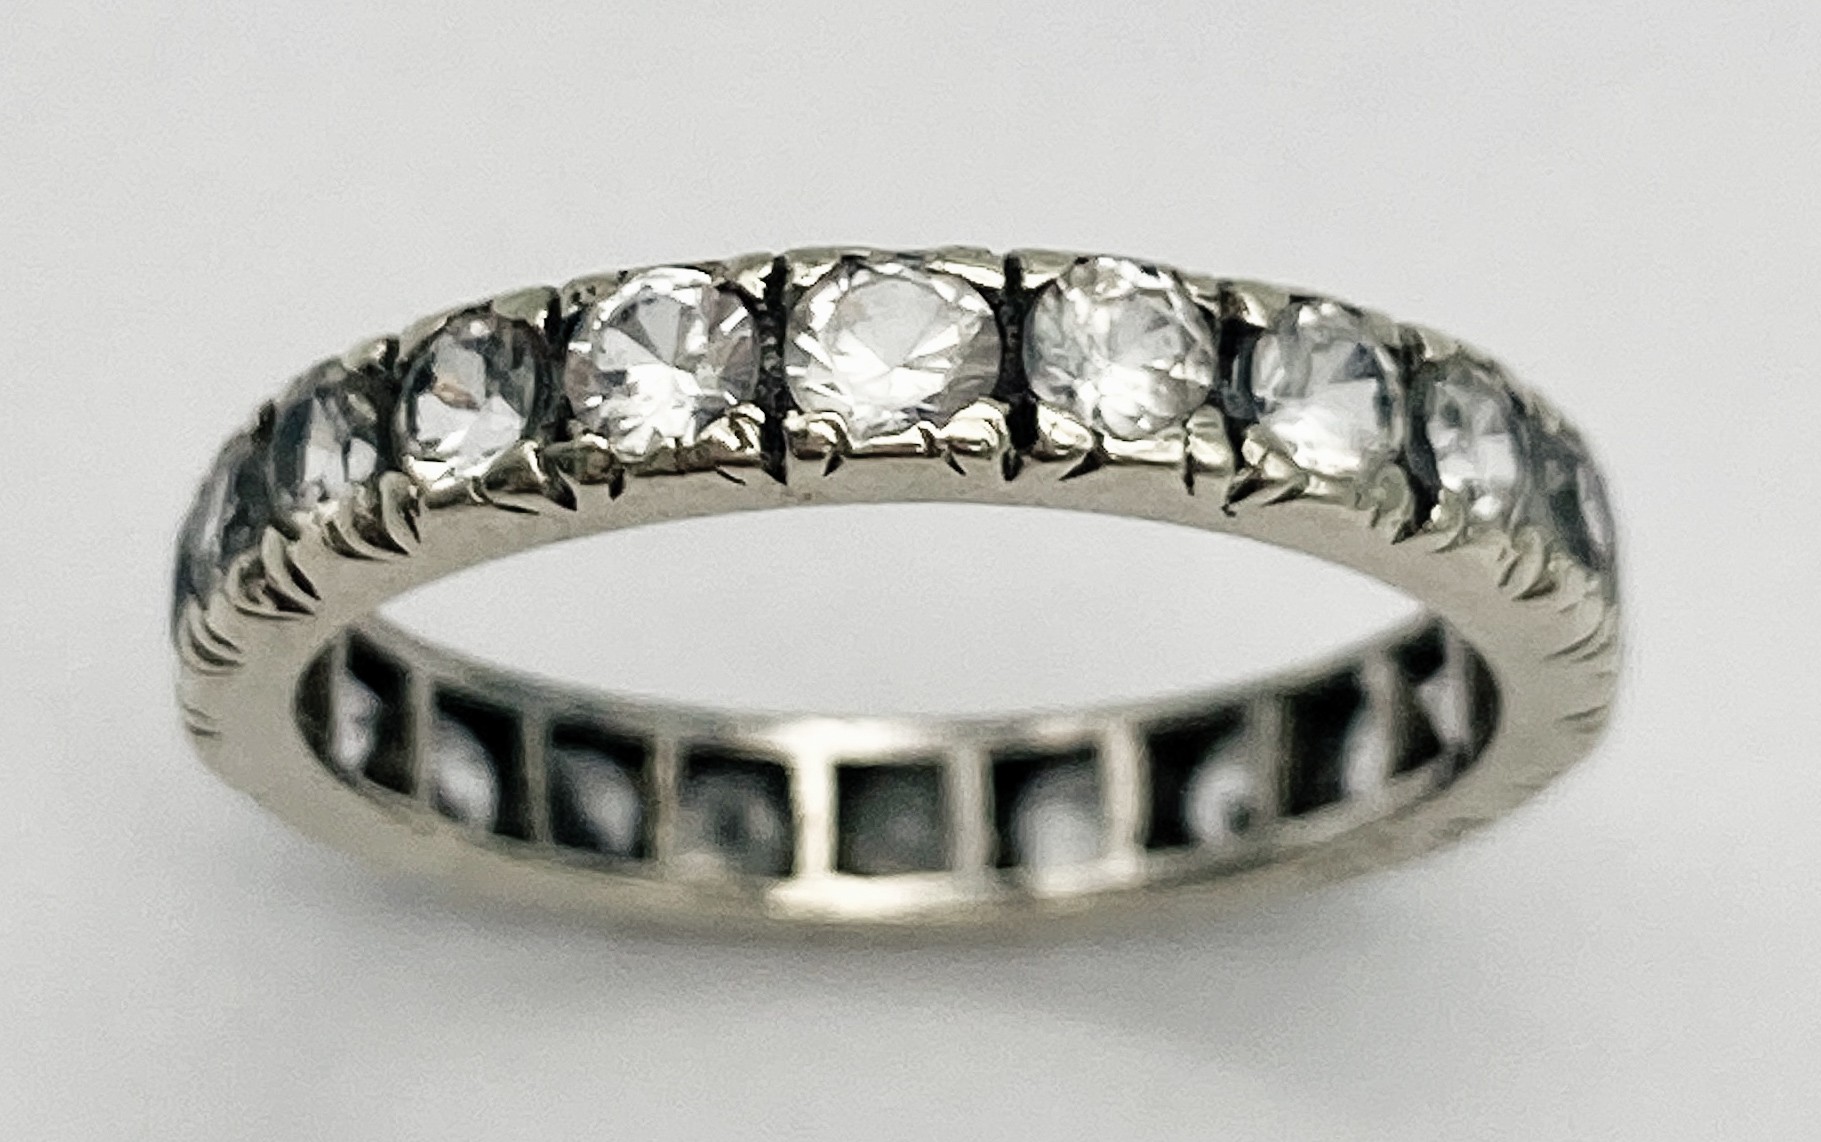 A VINTAGE 9K WHITE GOLD (TESTED) DIAMOND FULL ETERNITY RING. 2.5G. SIZE 0. - Image 2 of 6